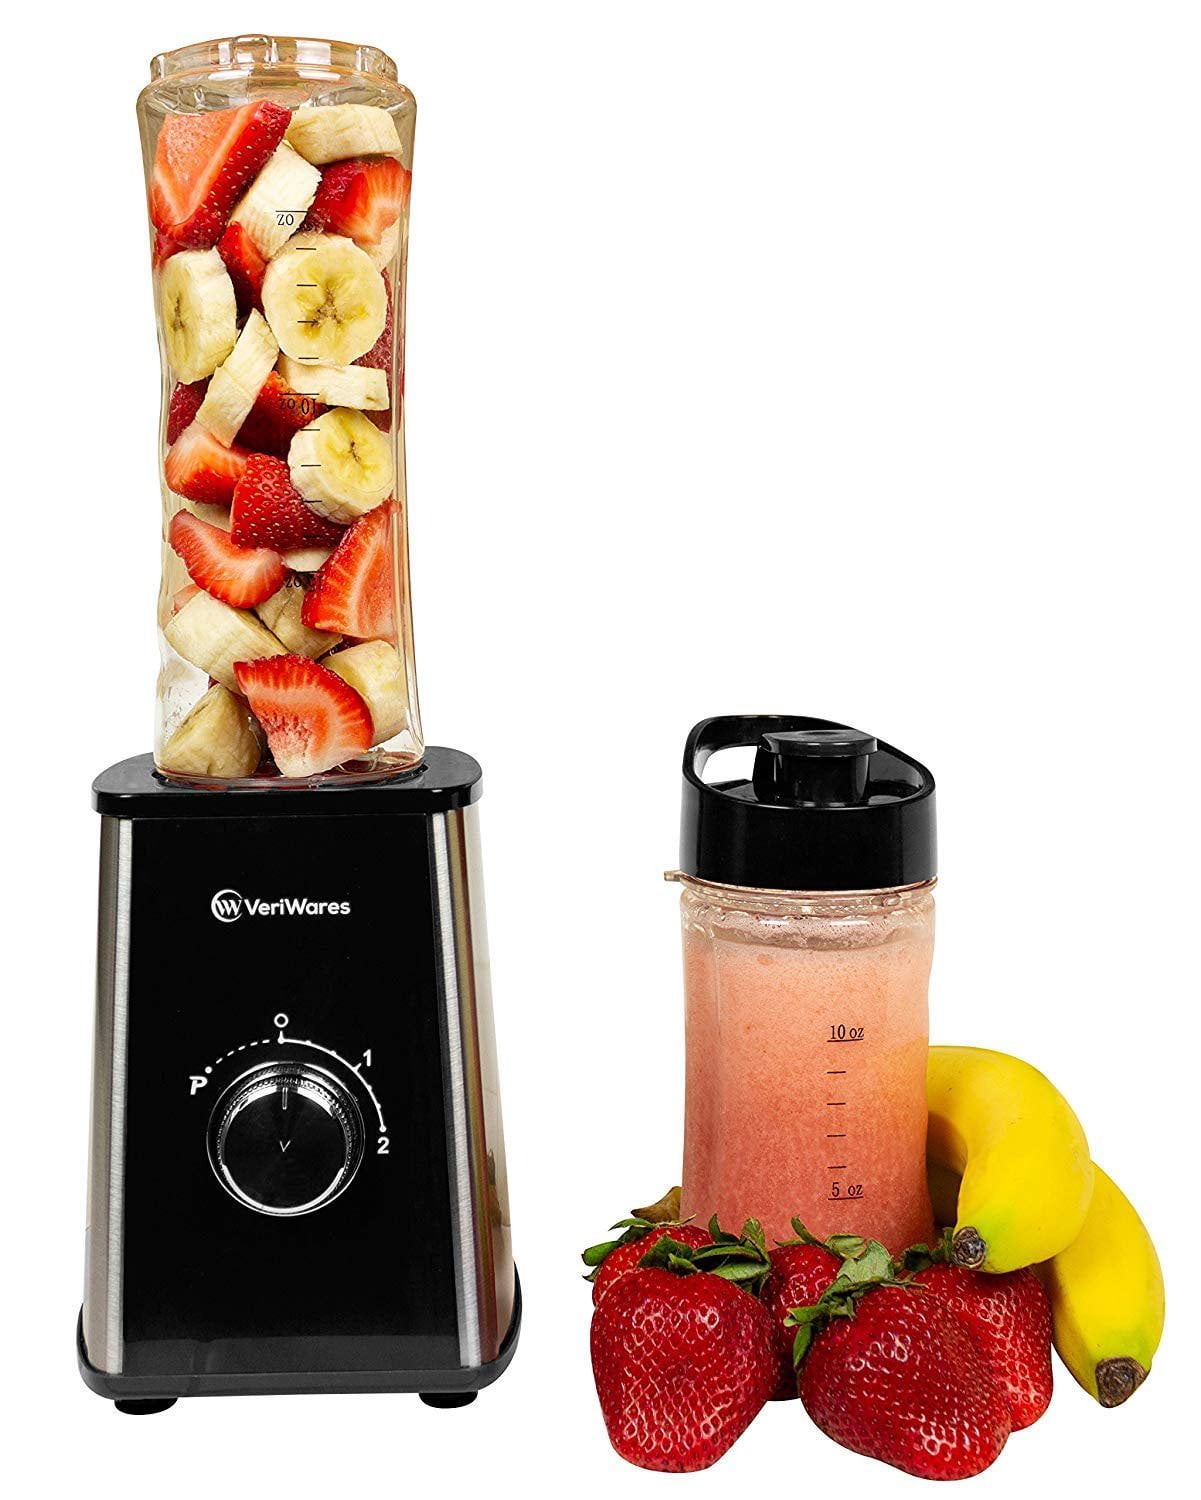 Personal Blender for Shakes Portable 2-Speed Motor and 3 Blades Good for Practical and Compact Design Smoothie Maker 2 BPA-Free Bottles with Oz Marks Black - Walmart.com